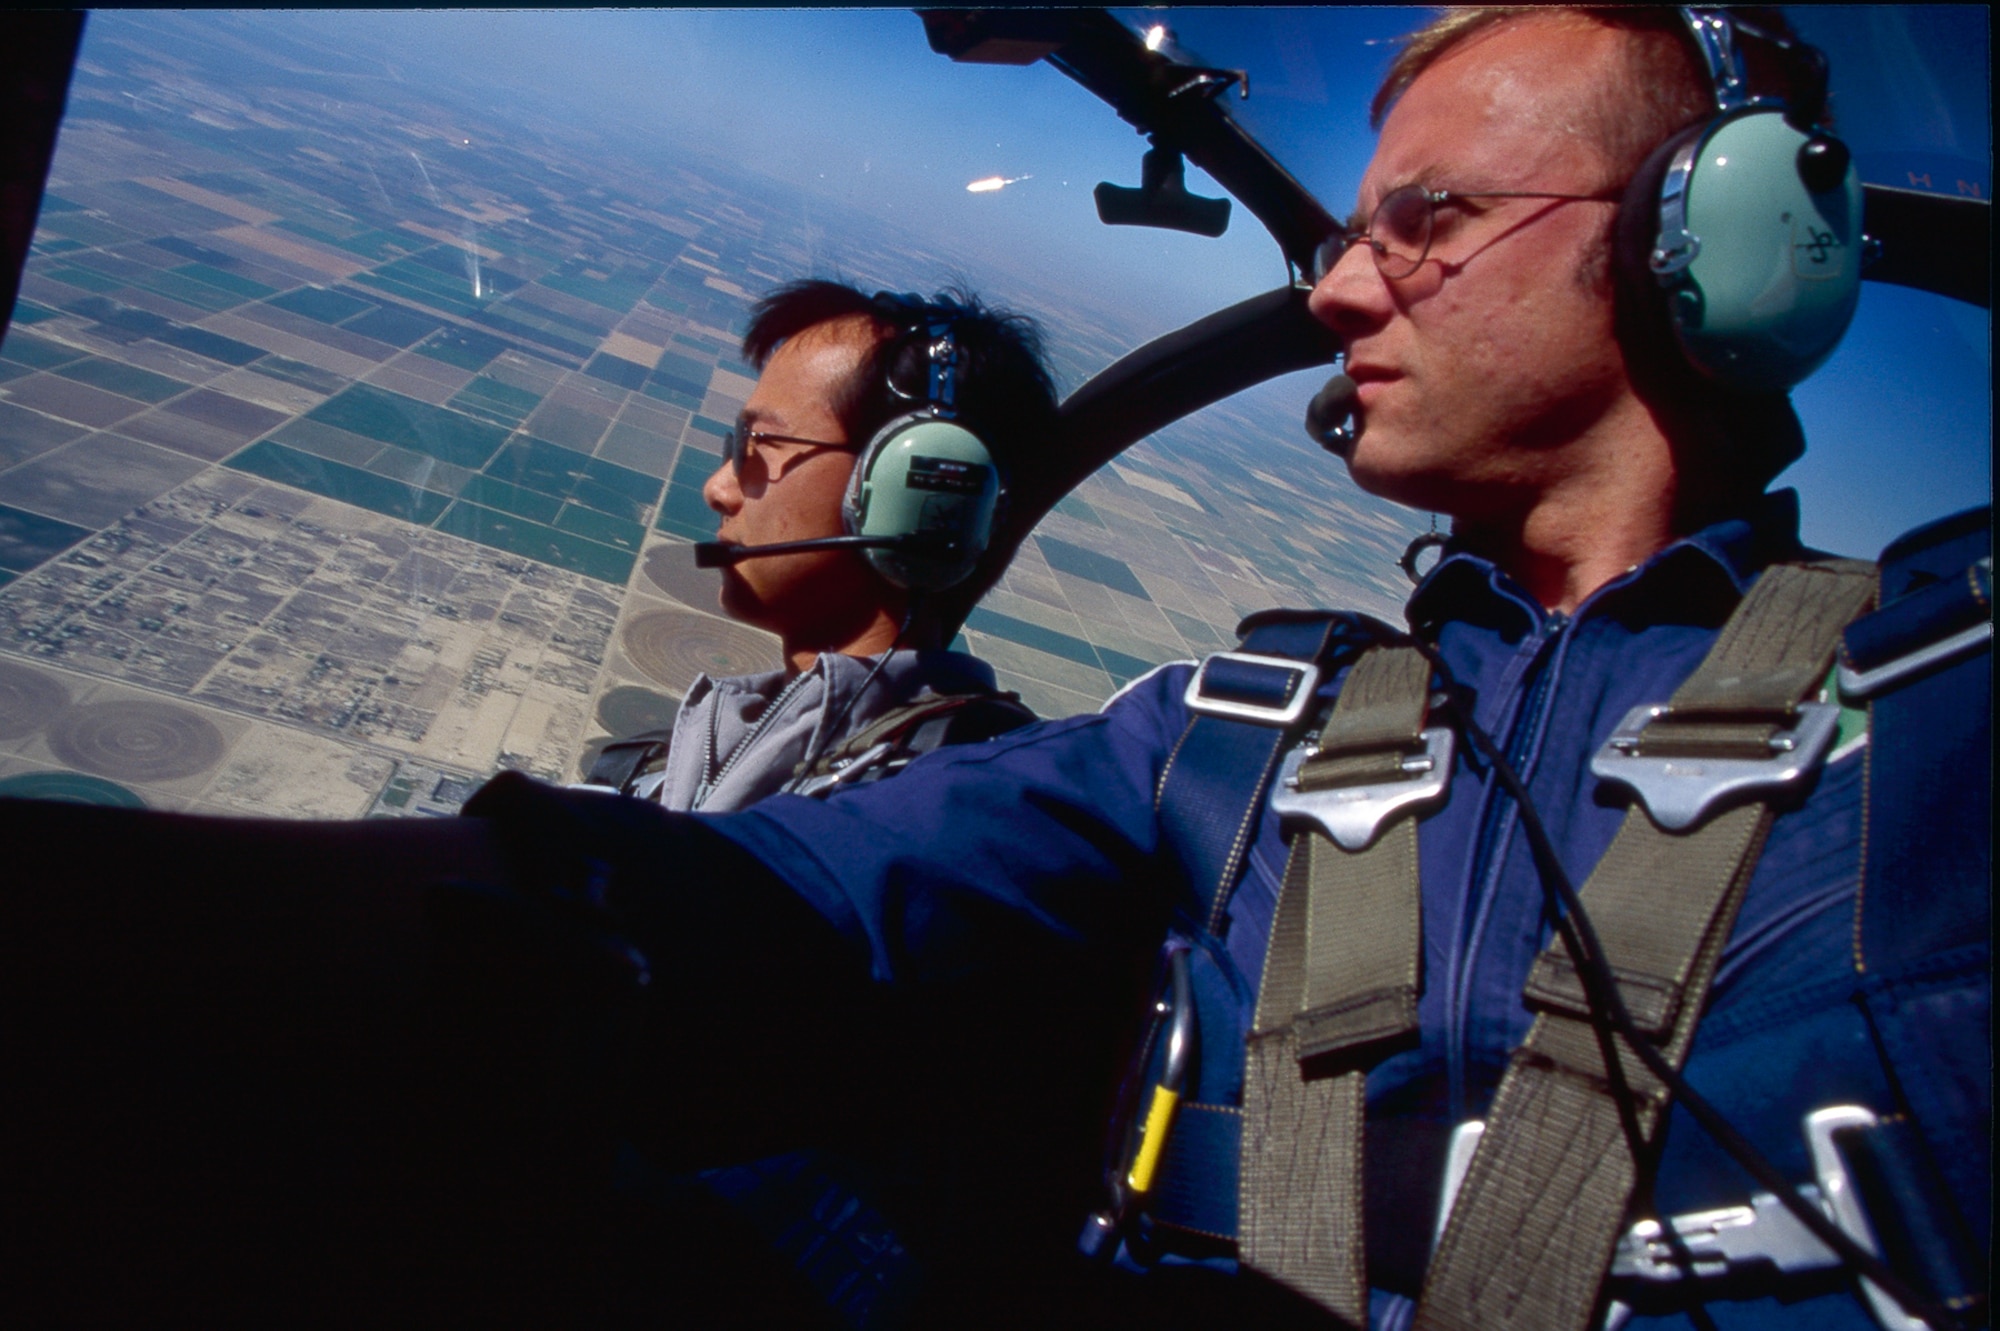 In addition to his duties as an Individual Mobilization Augmentee and radar scientist at Raytheon, Chief Master Sgt. Bohdan Pywowarczuk is also an aerobatics instructor.